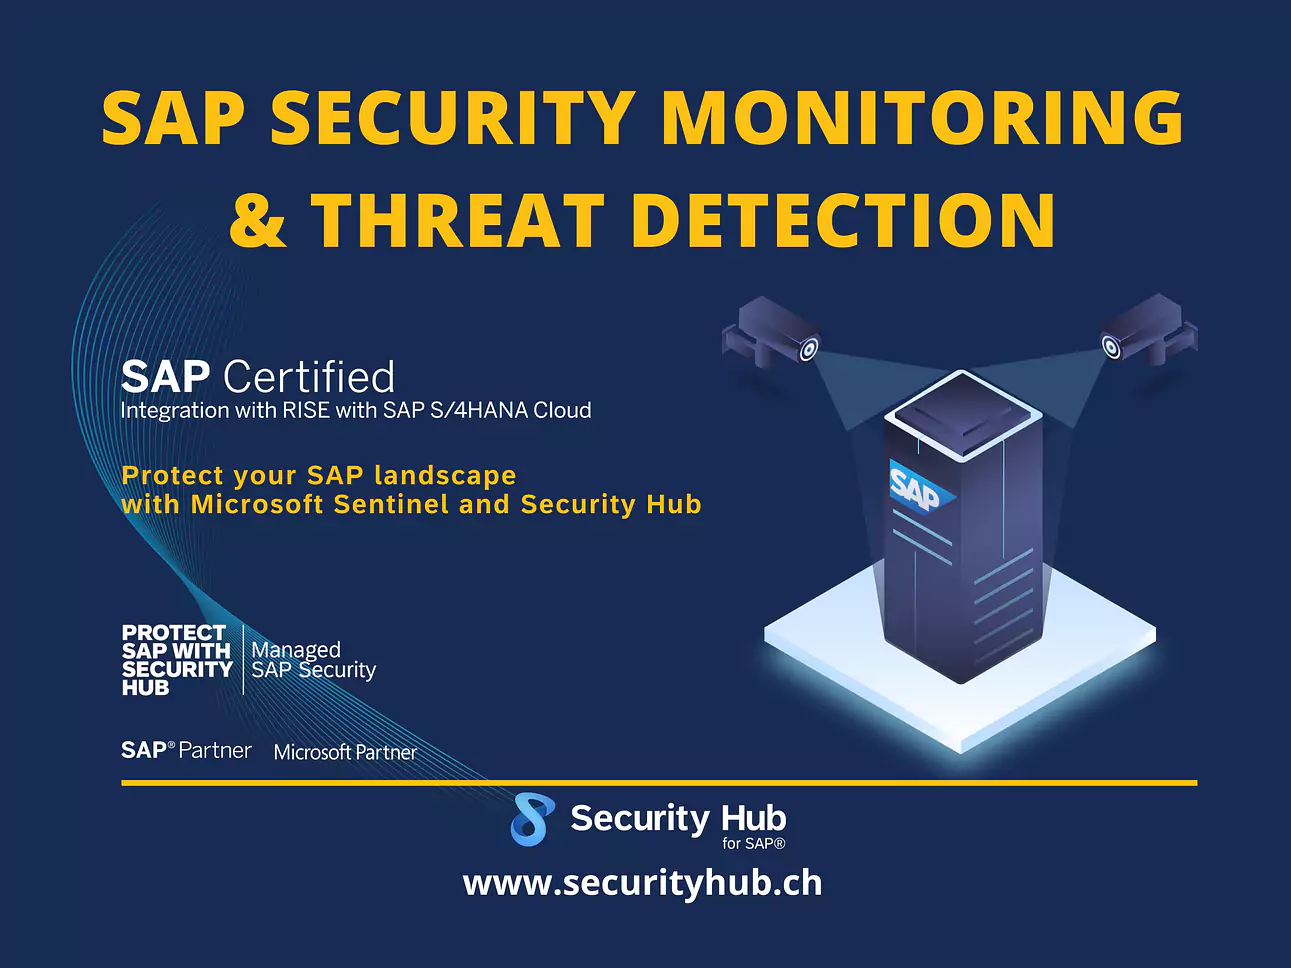 SAP® Security Monitoring and Threat Detection (SAP SIEM)